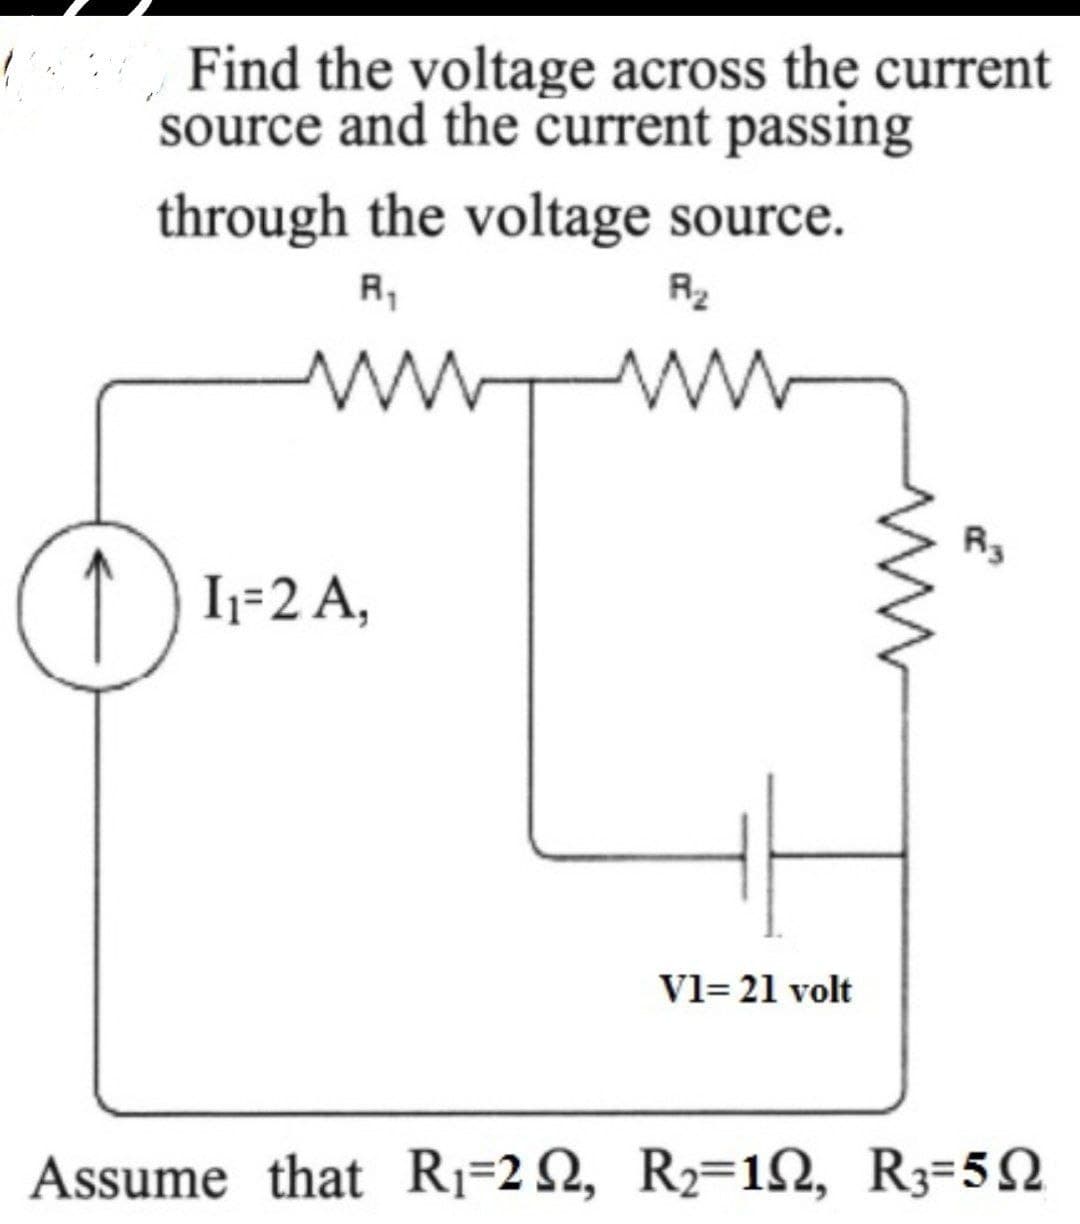 Find the voltage across the current
source and the current passing
through the voltage source.
R2
ww WW
R3
(1) 1+2A,
Vl= 21 volt
Assume that R1=2 N, R2=12, R3=52
